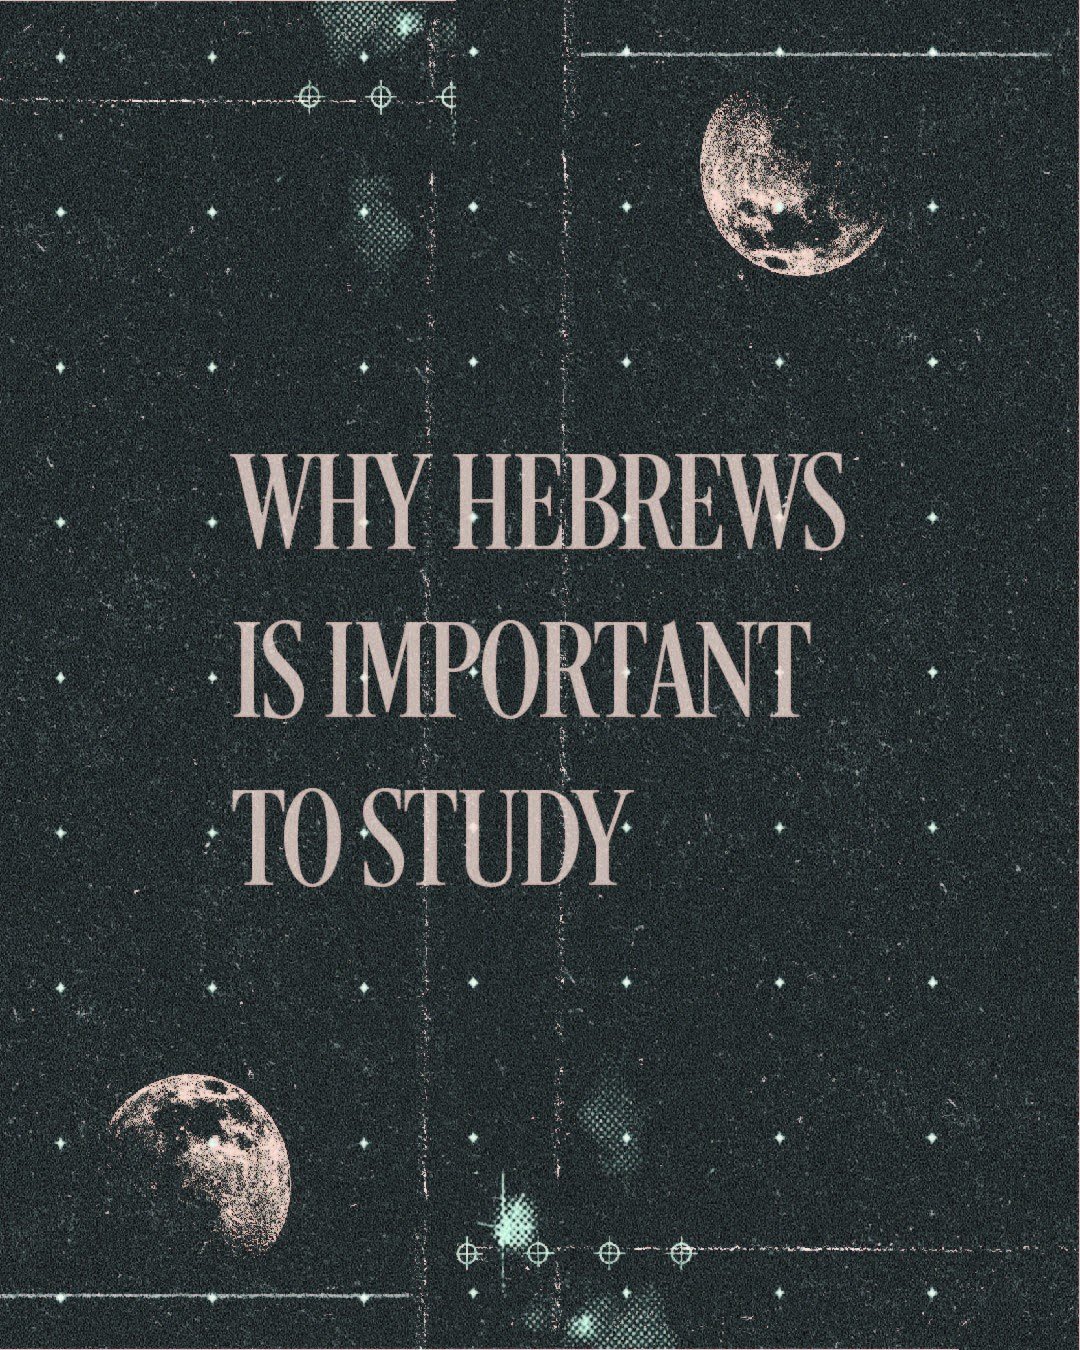 We may have closed this chapter as a church, but we highly recommend continuing to study Hebrews in your personal time with the Lord. 

#mkechurch #mercyhillchurch #sermonnotes #hebrewsstudy